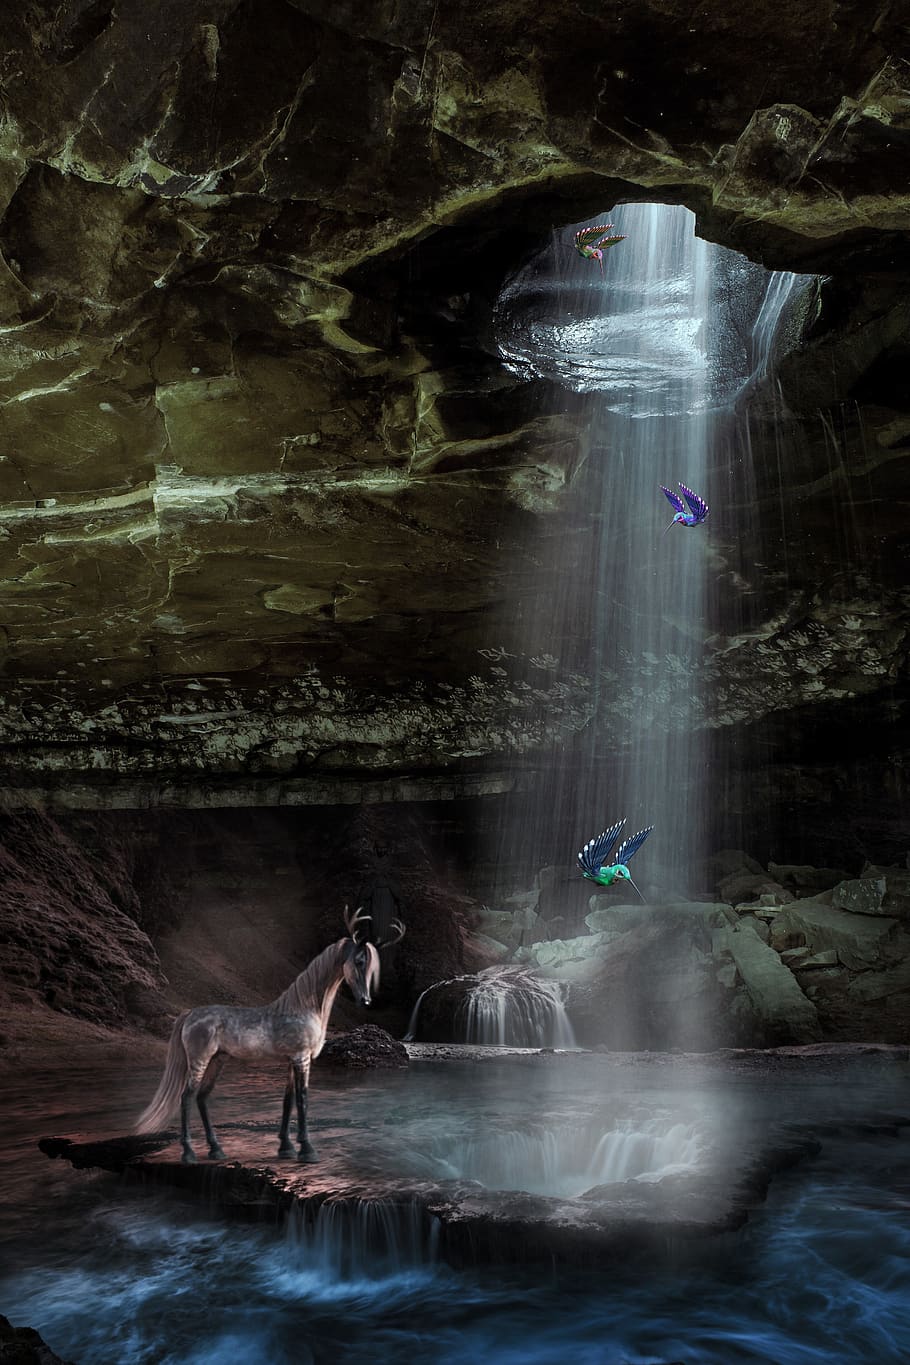 unicorn, waters, nature, waterfall, darkness, wet, light, rock, river, cave